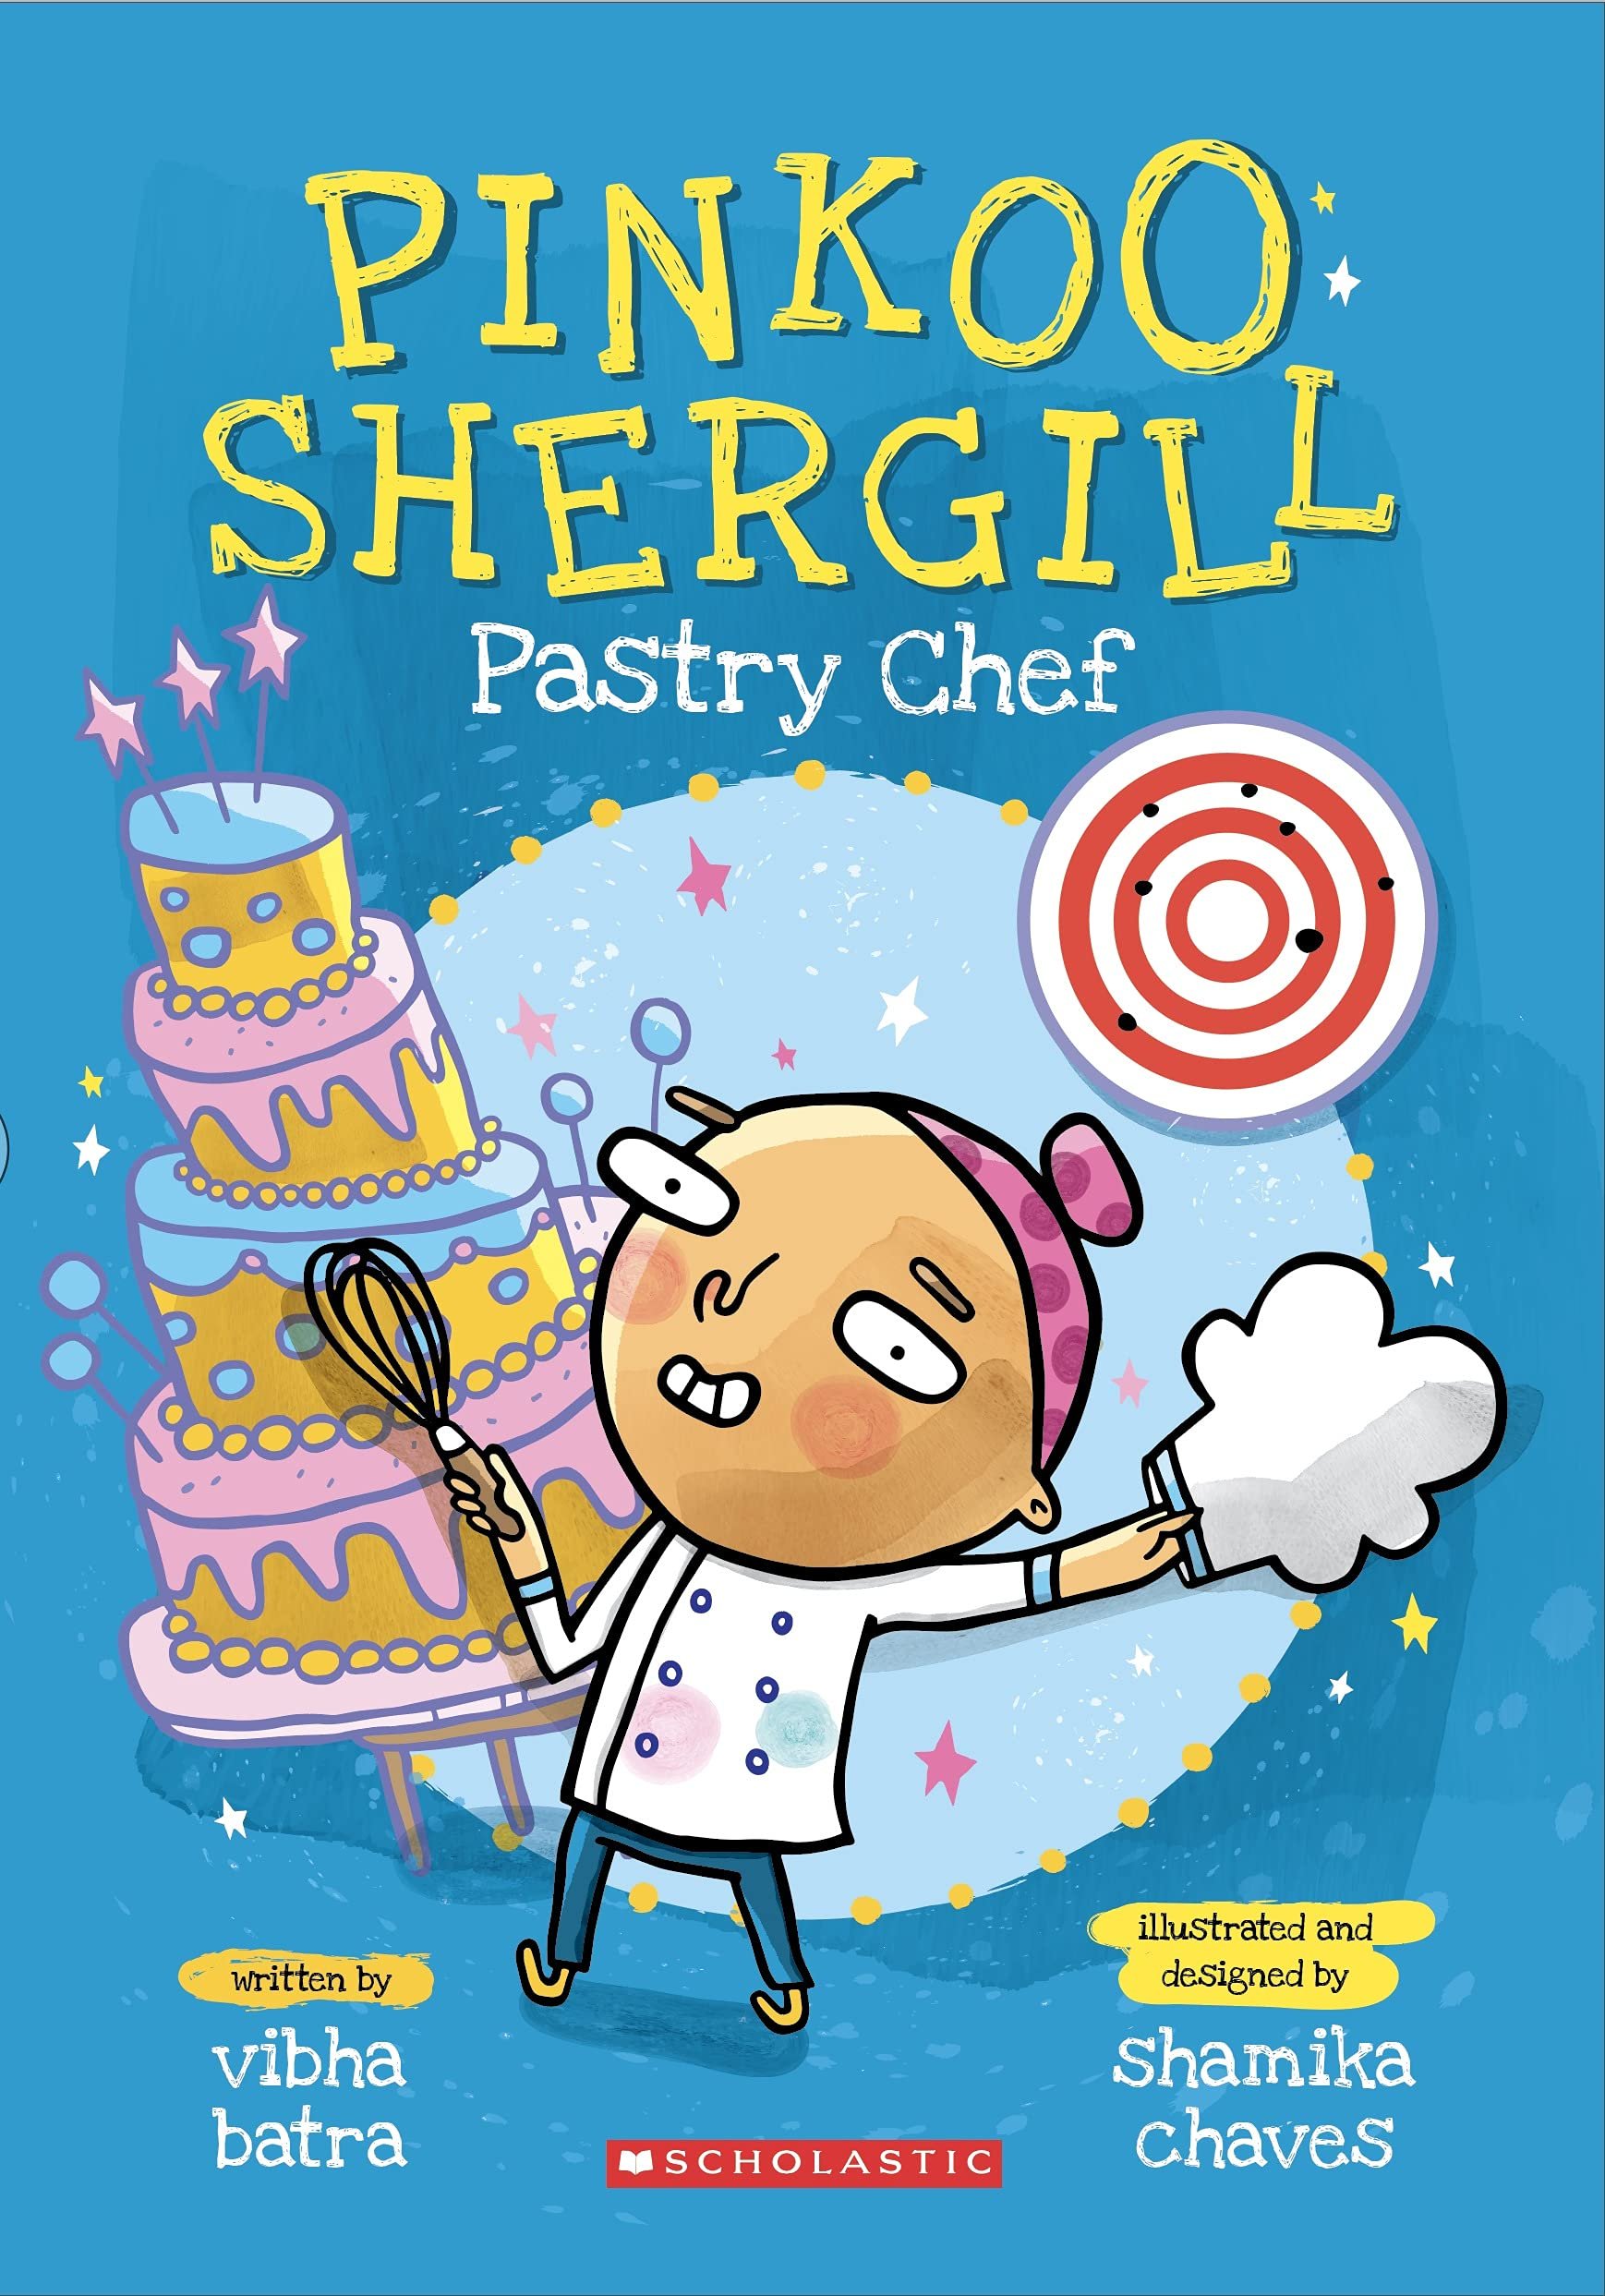 Pinkoo Shergill Pastry Chef - Cover.jpeg